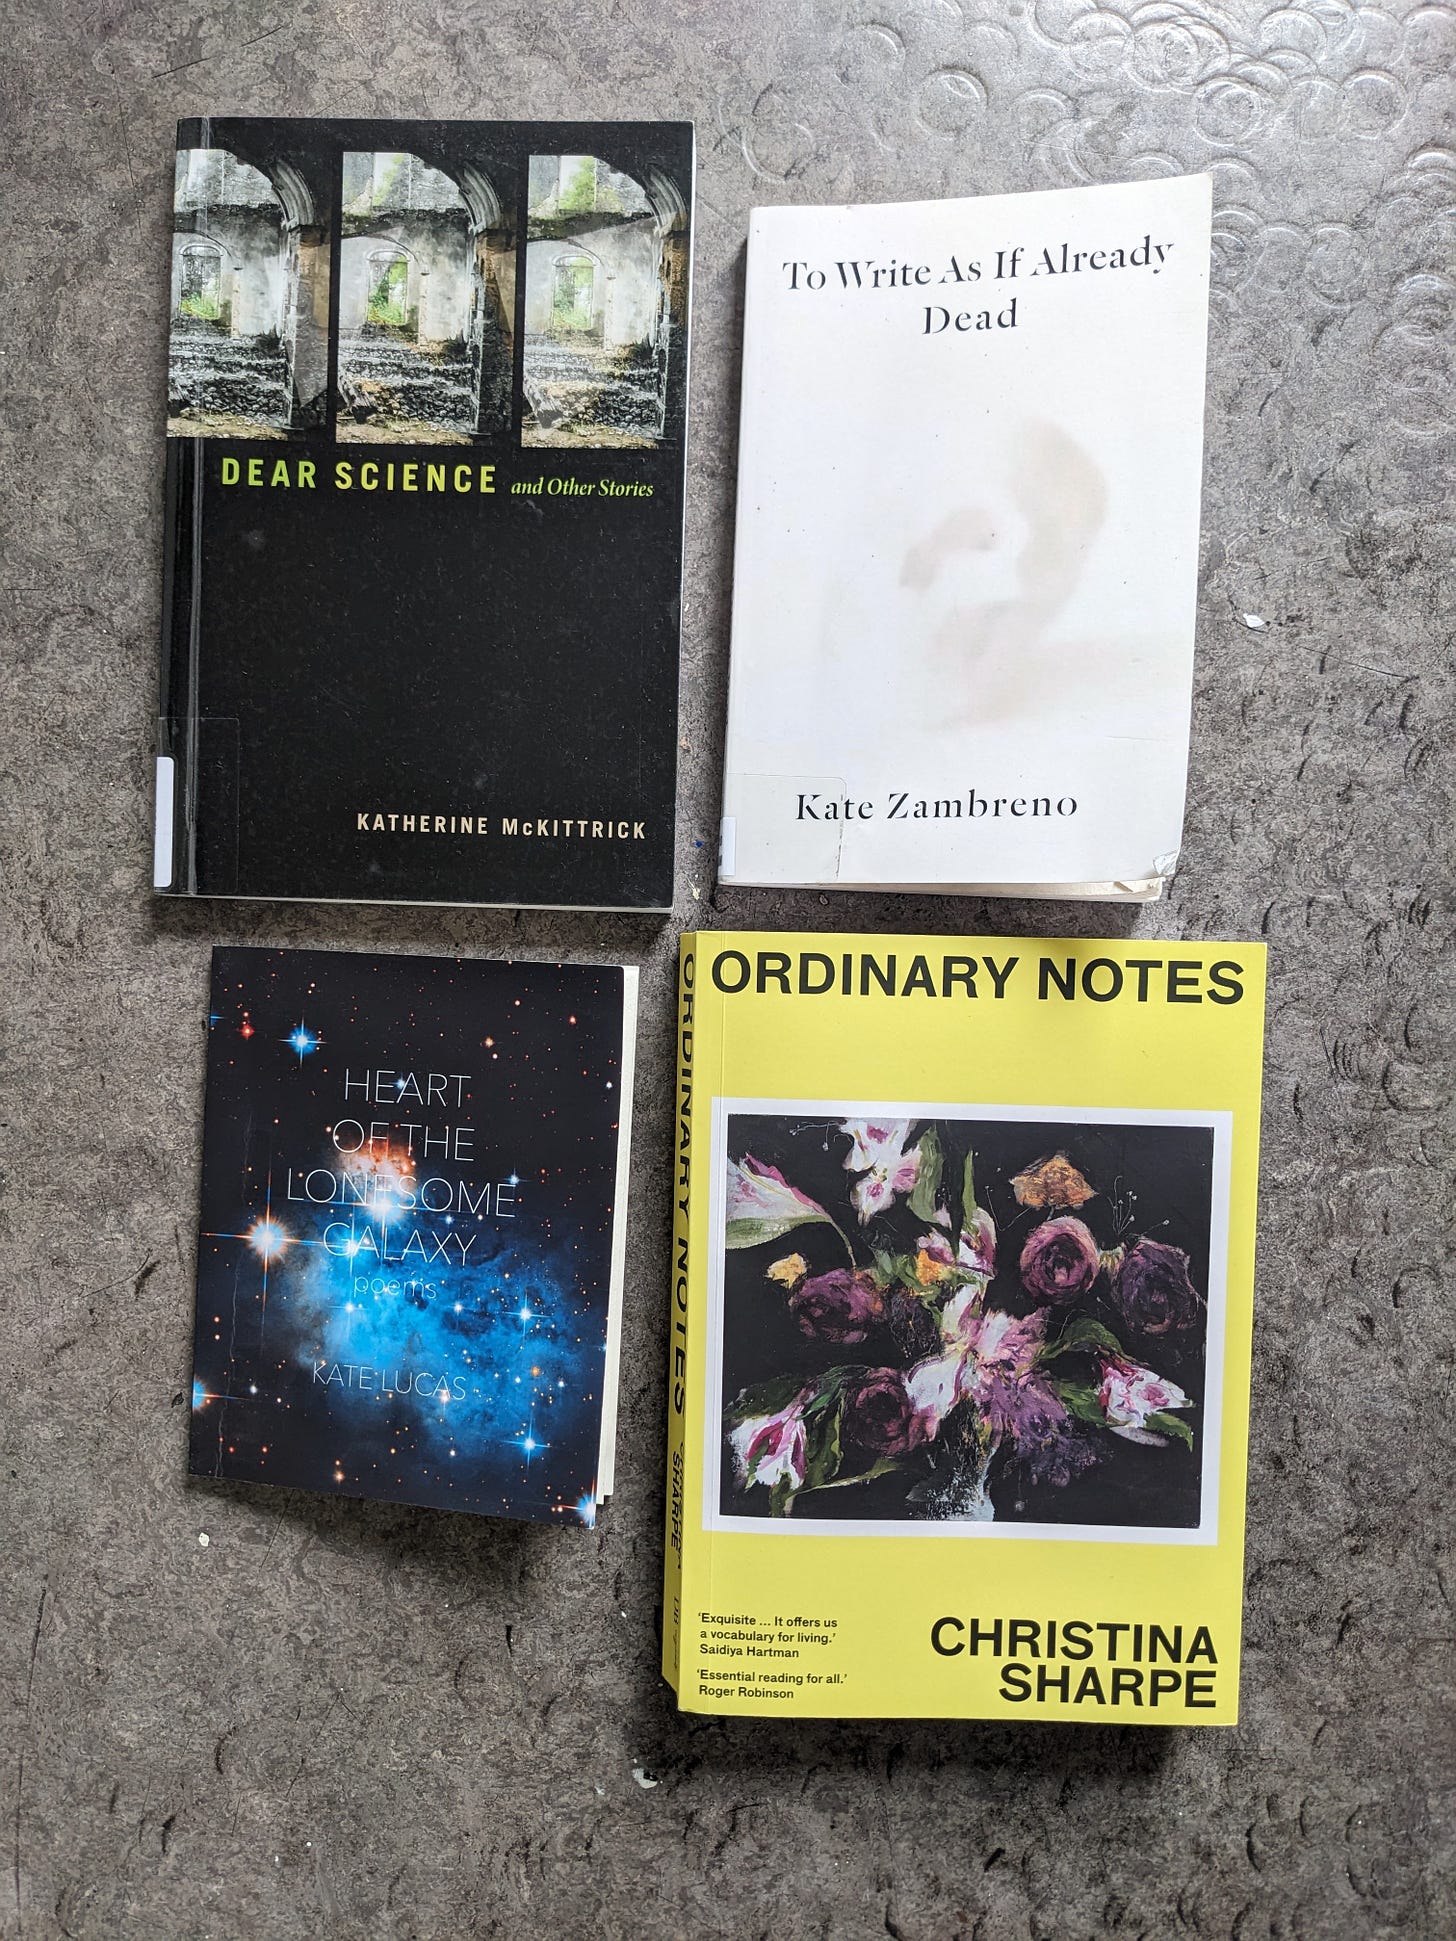 Image of 4 books: Dear Science and Other Stories; To Write as if Already Dead; Heart of the Lonesome Galaxy; Ordinary Notes